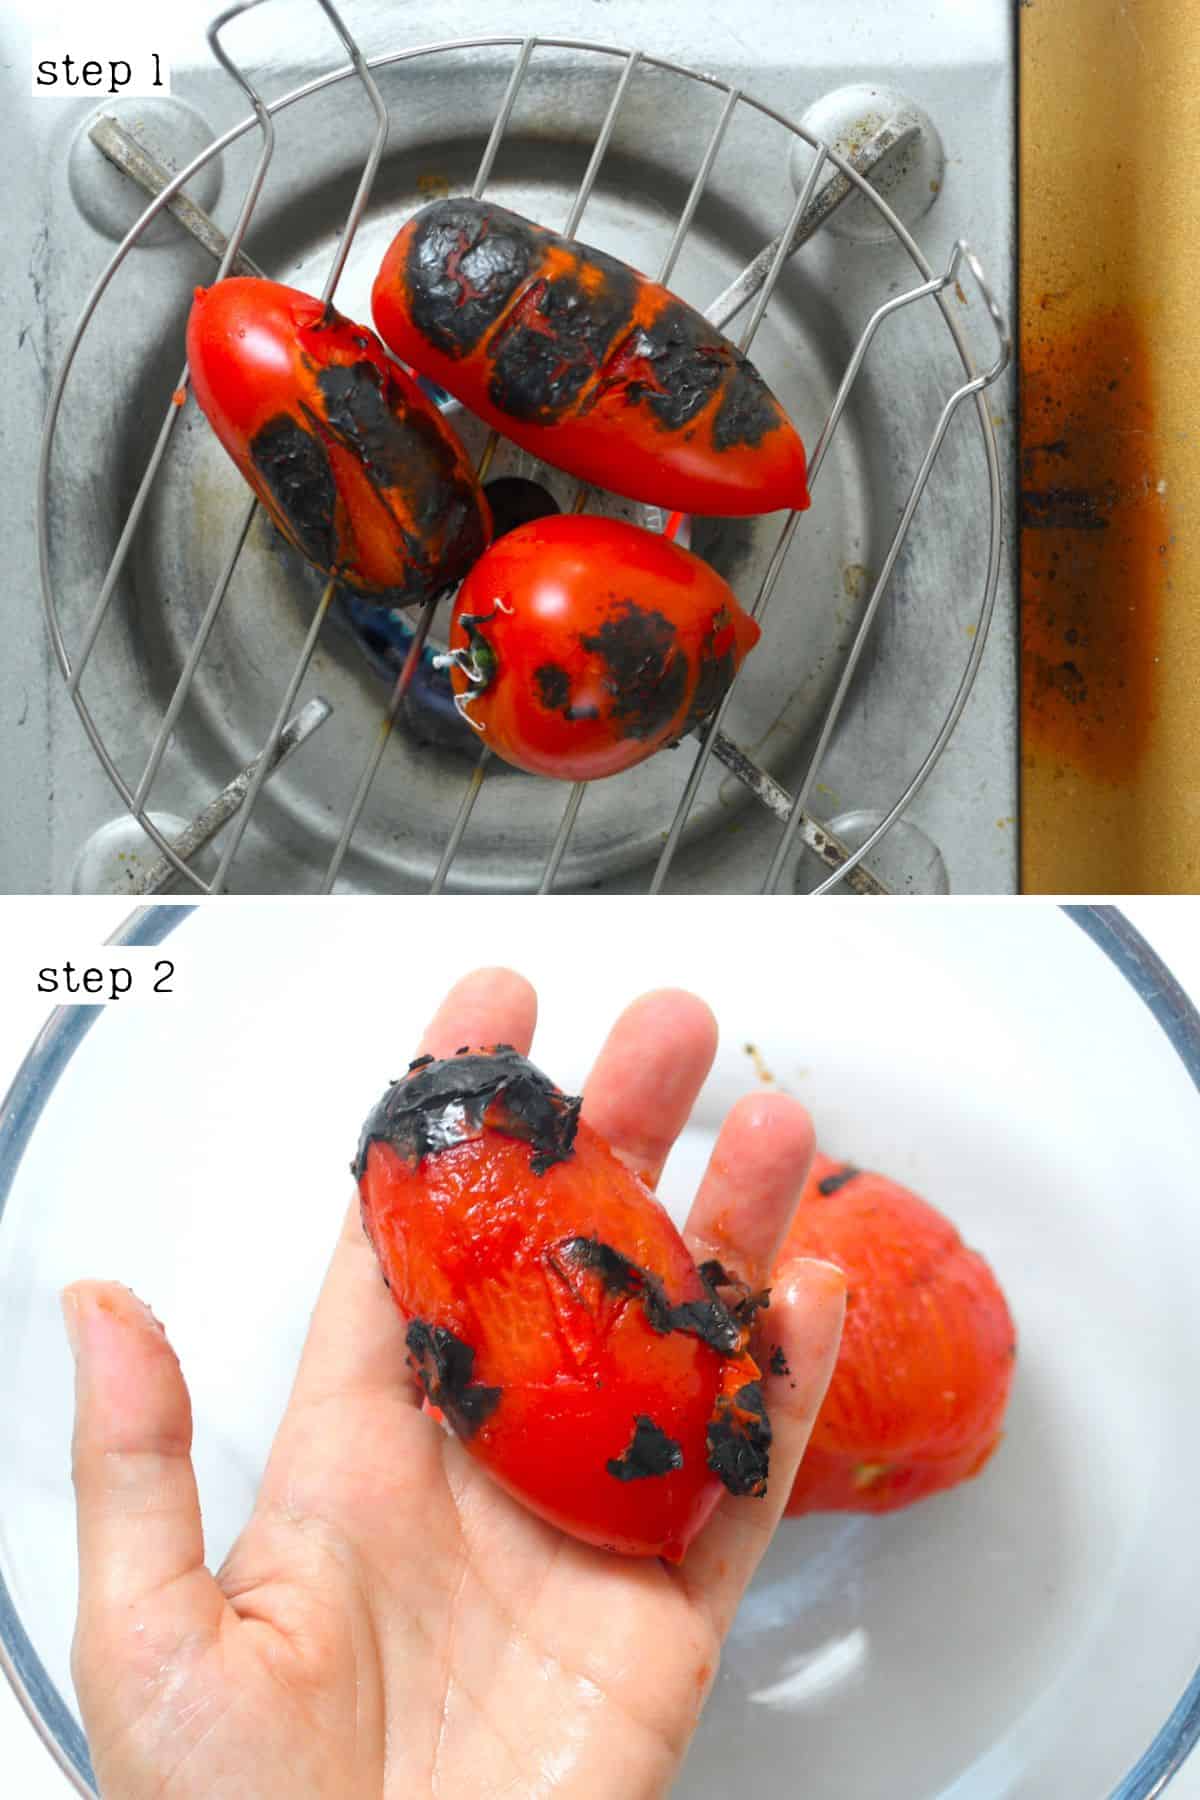 Steps for charring and peeling tomatoes